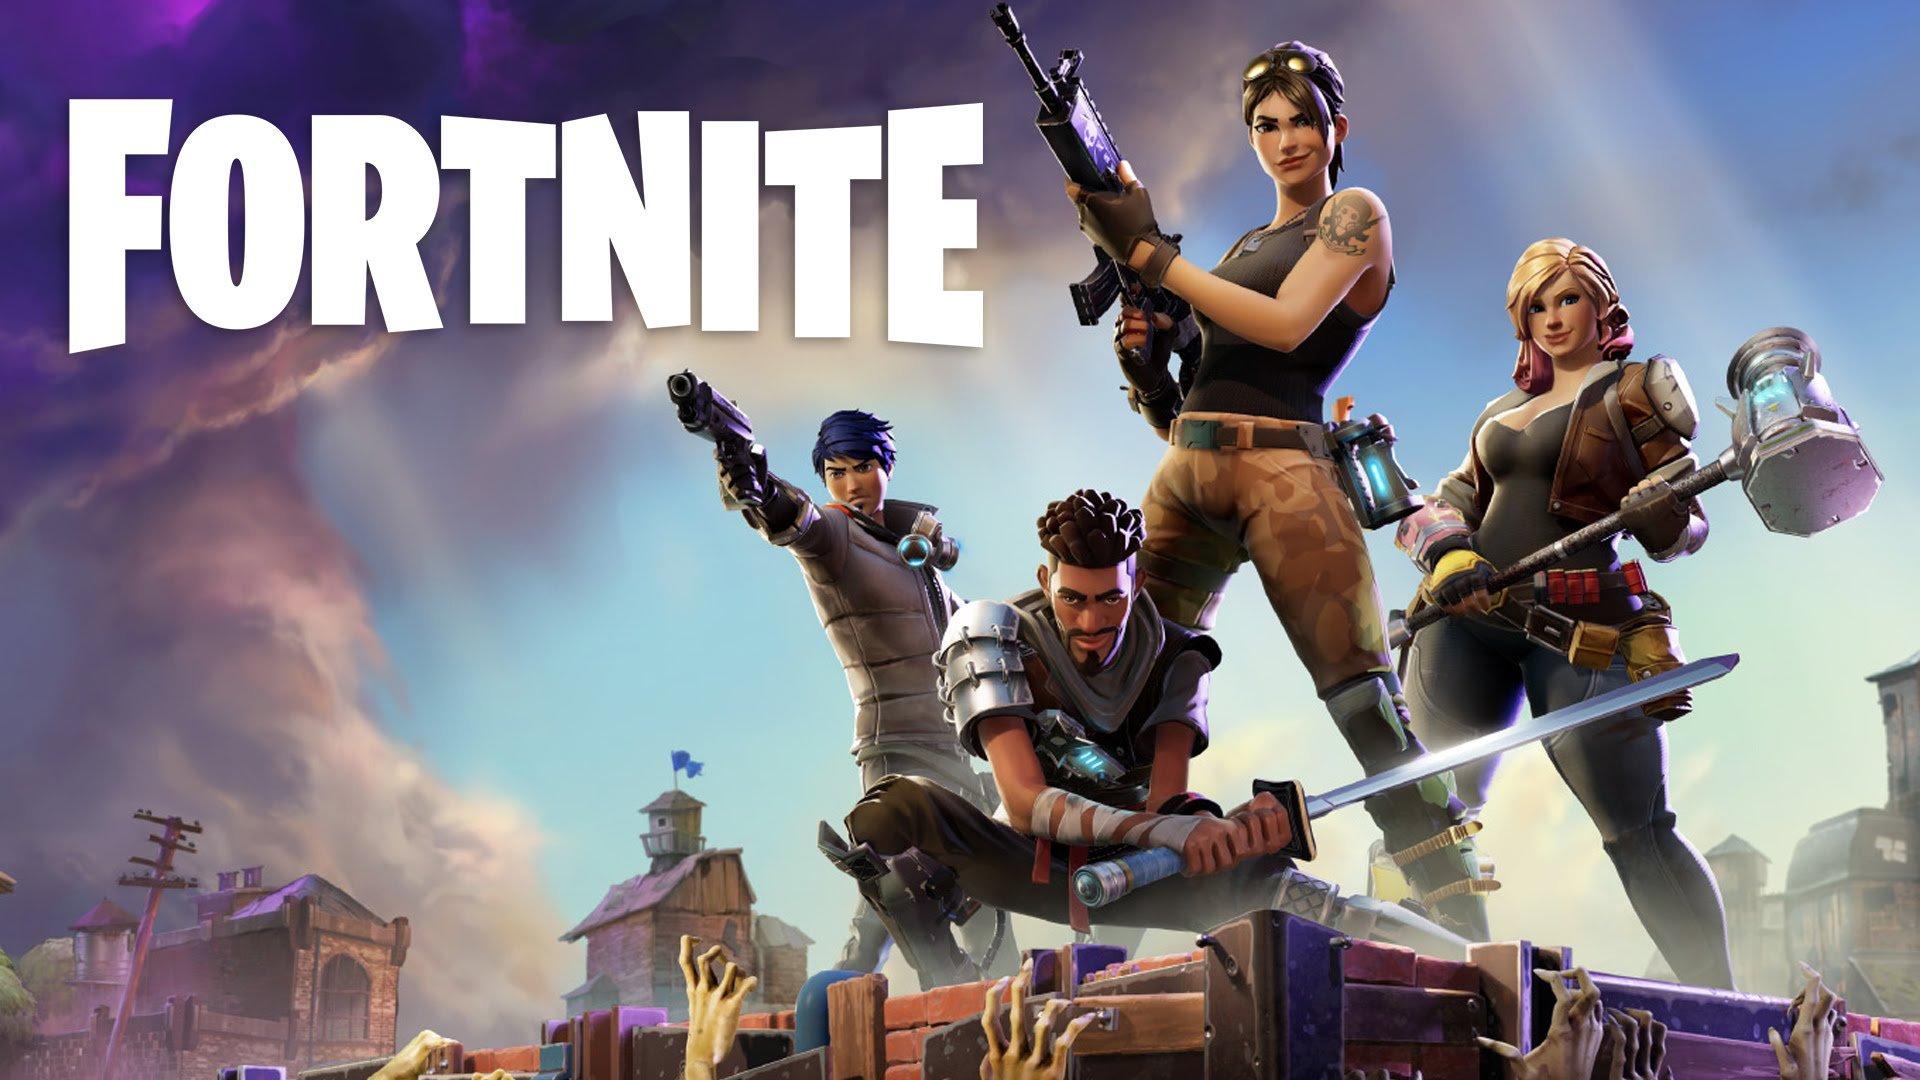 Fortnite update 1.8.1 adds ability to boost PS4 and PS4 Pro